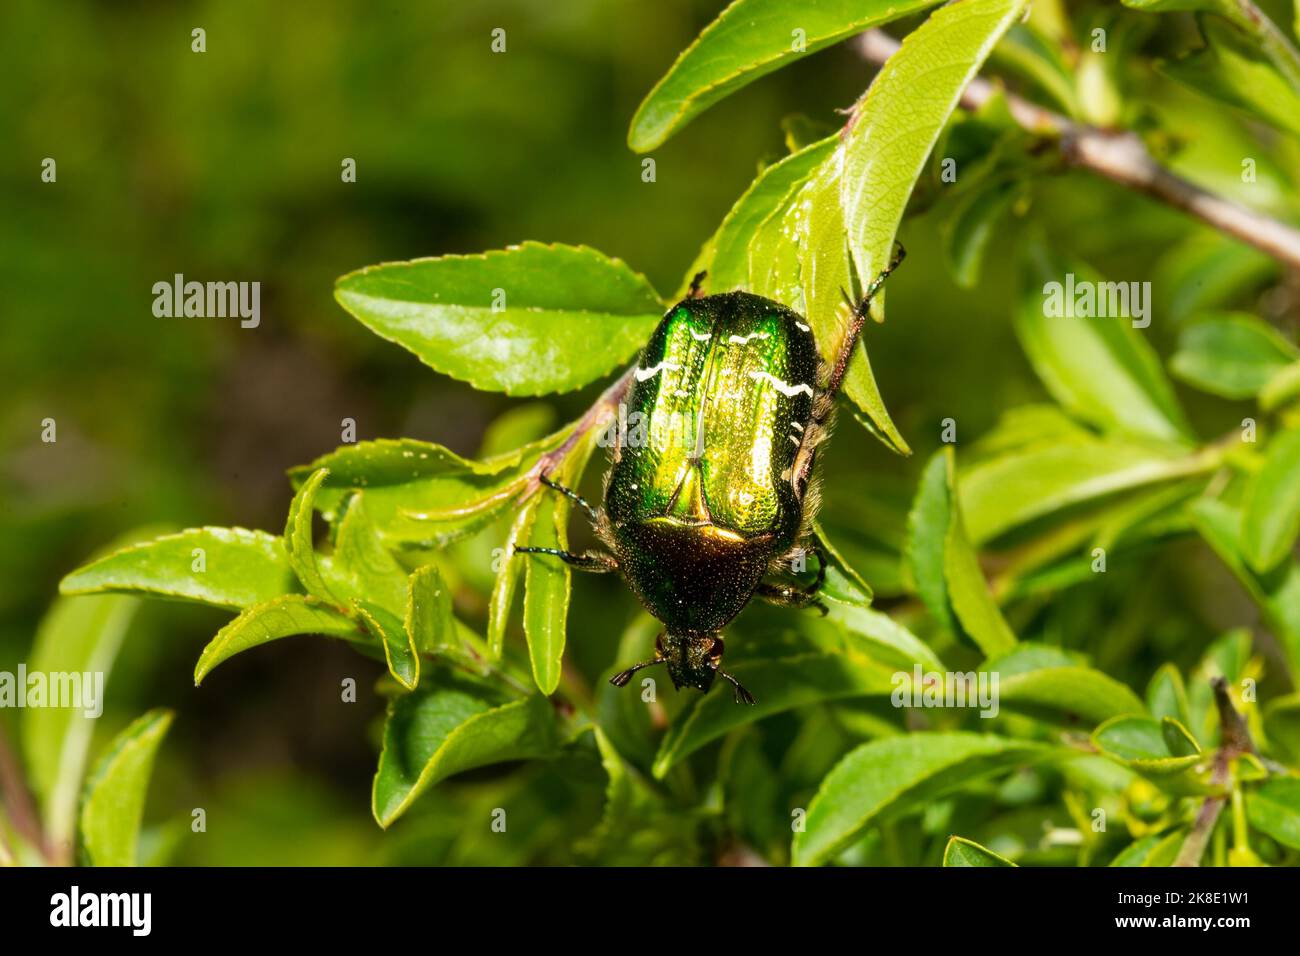 Common rose chafer sitting on green leaf looking down Stock Photo